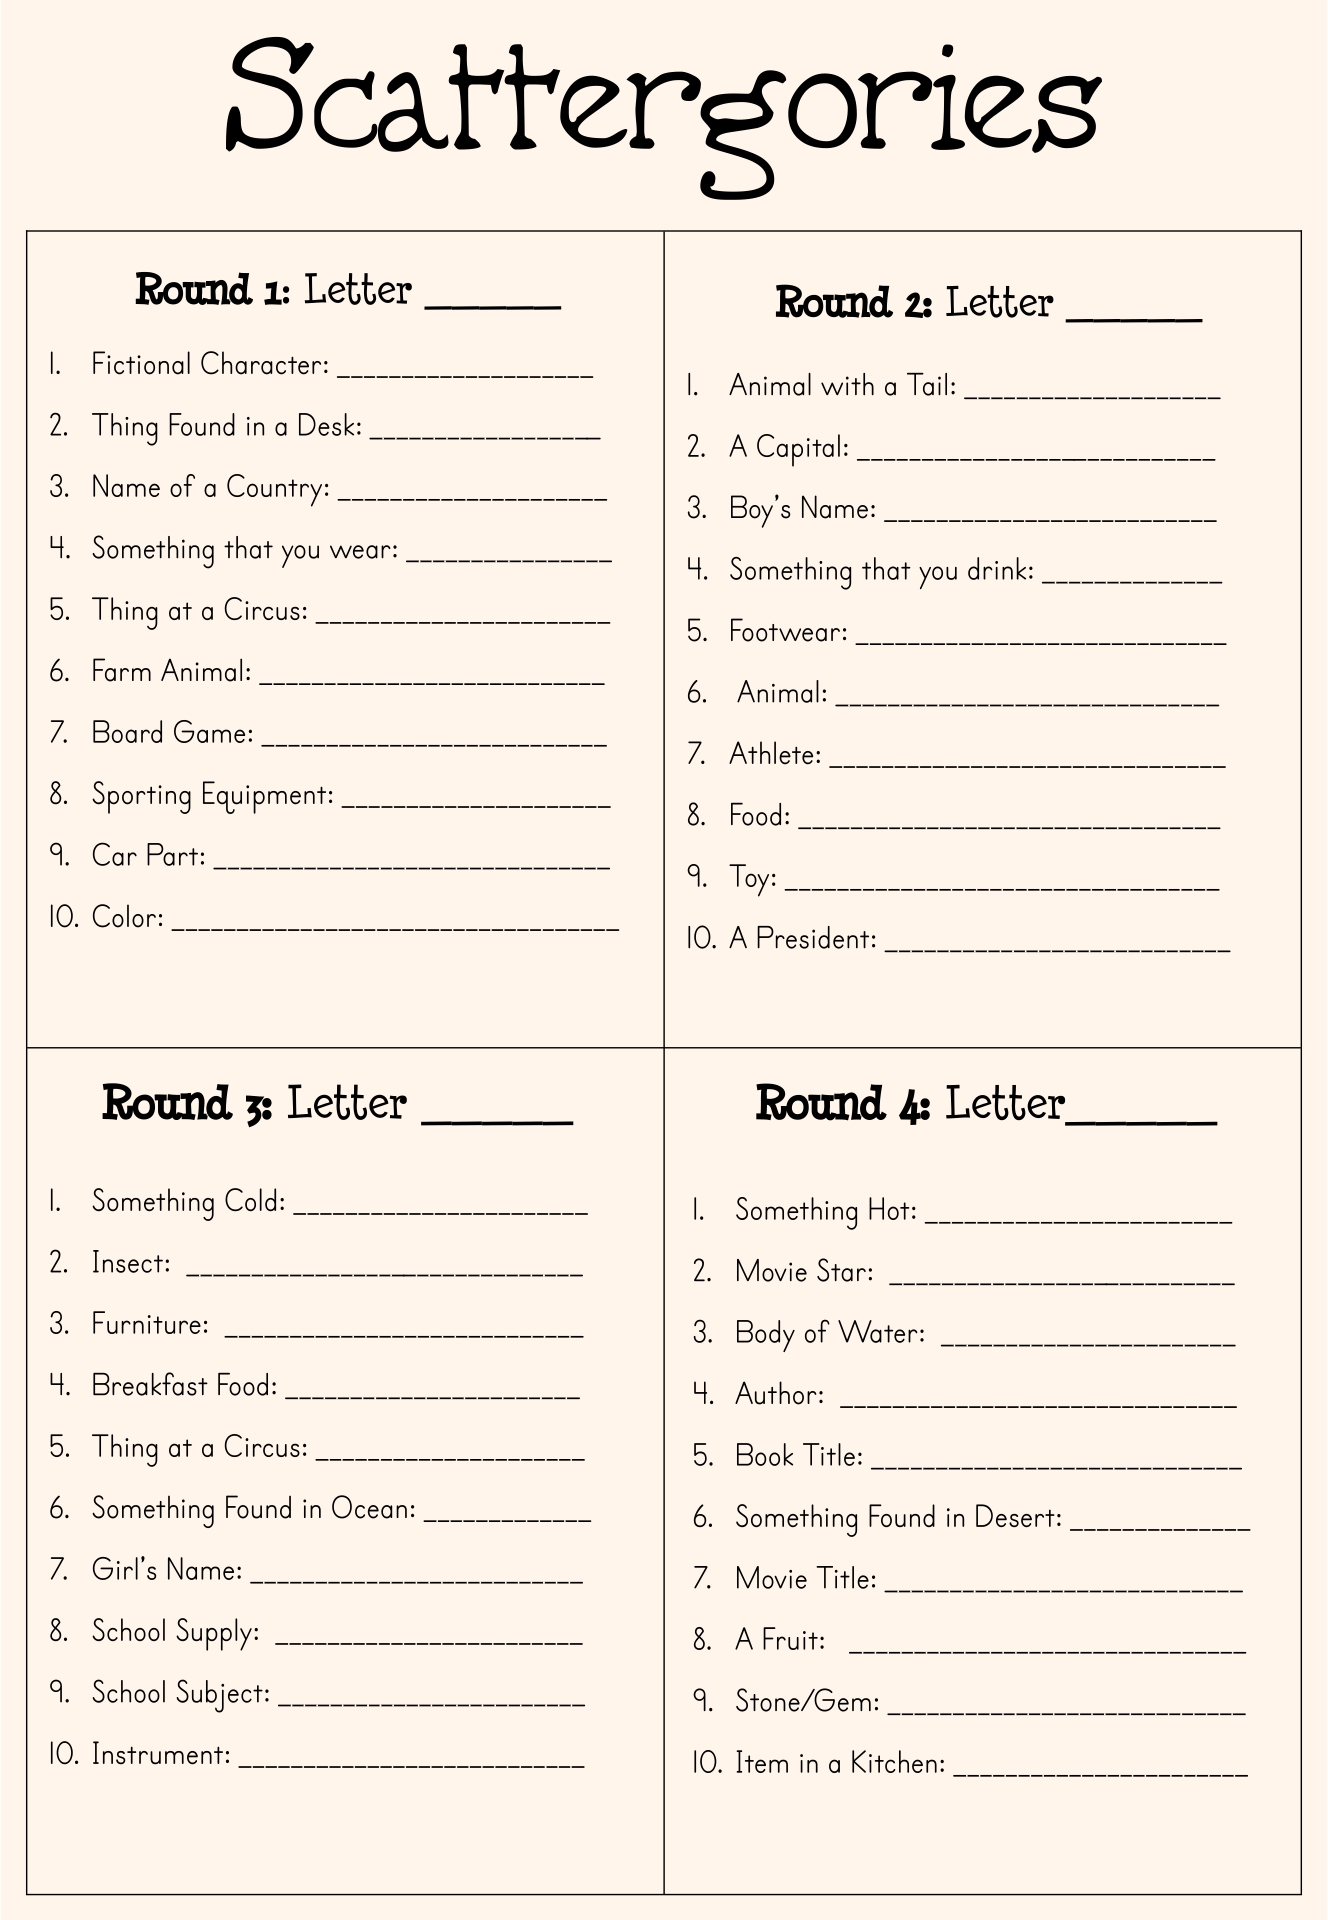 9-best-images-of-scattergories-sheets-printable-pdf-blank-vrogue